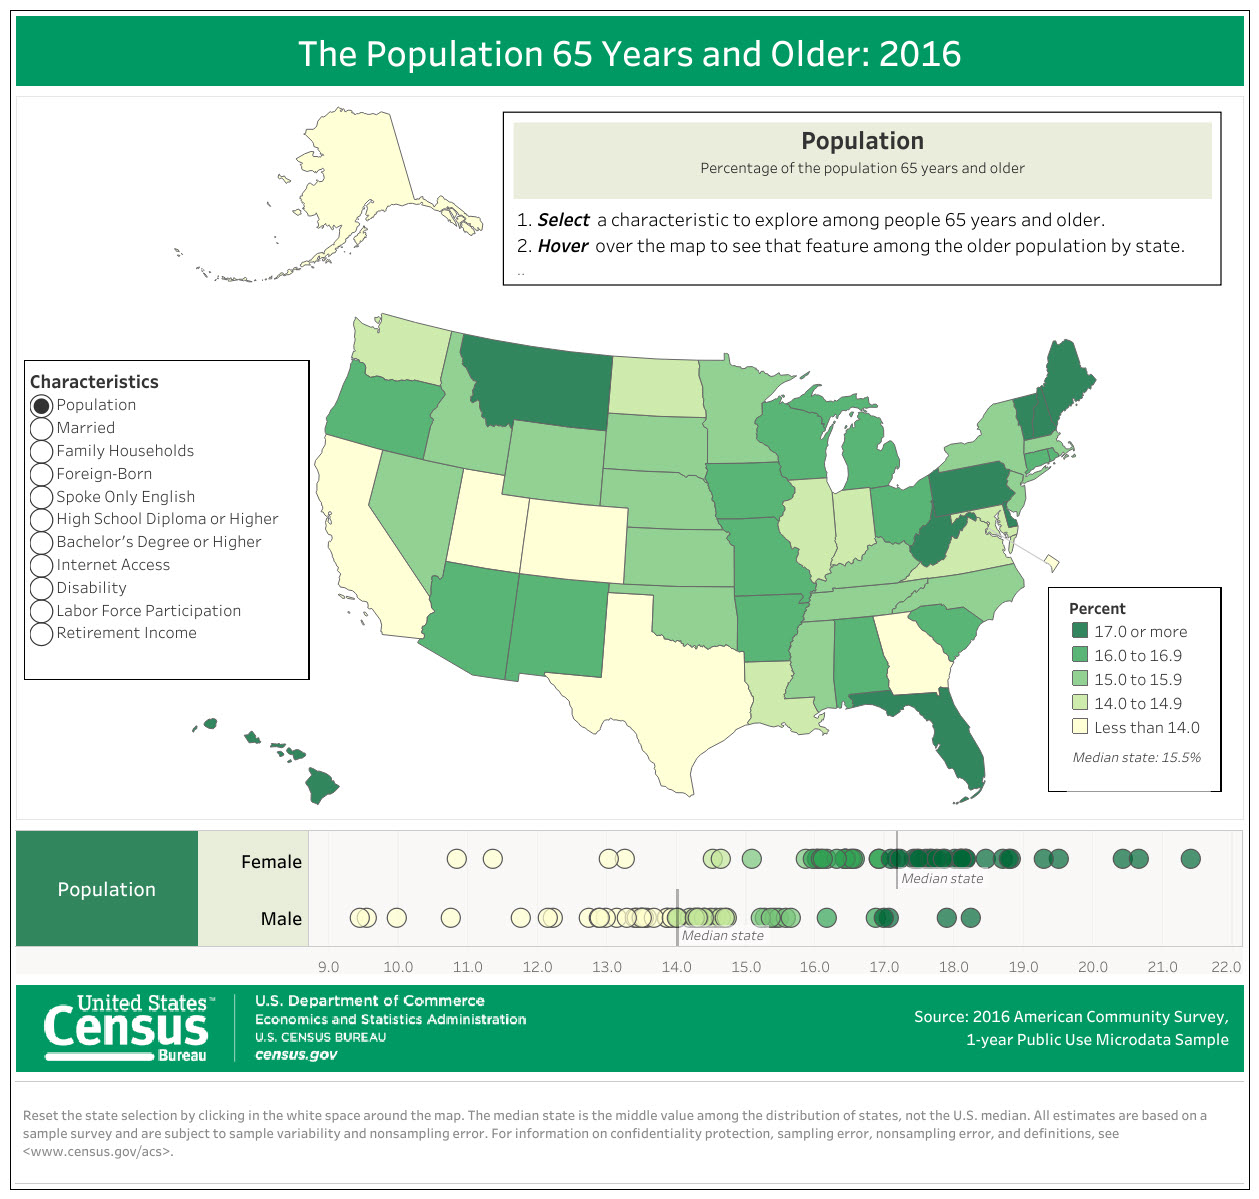 The Population 65 Years and Older: 2016